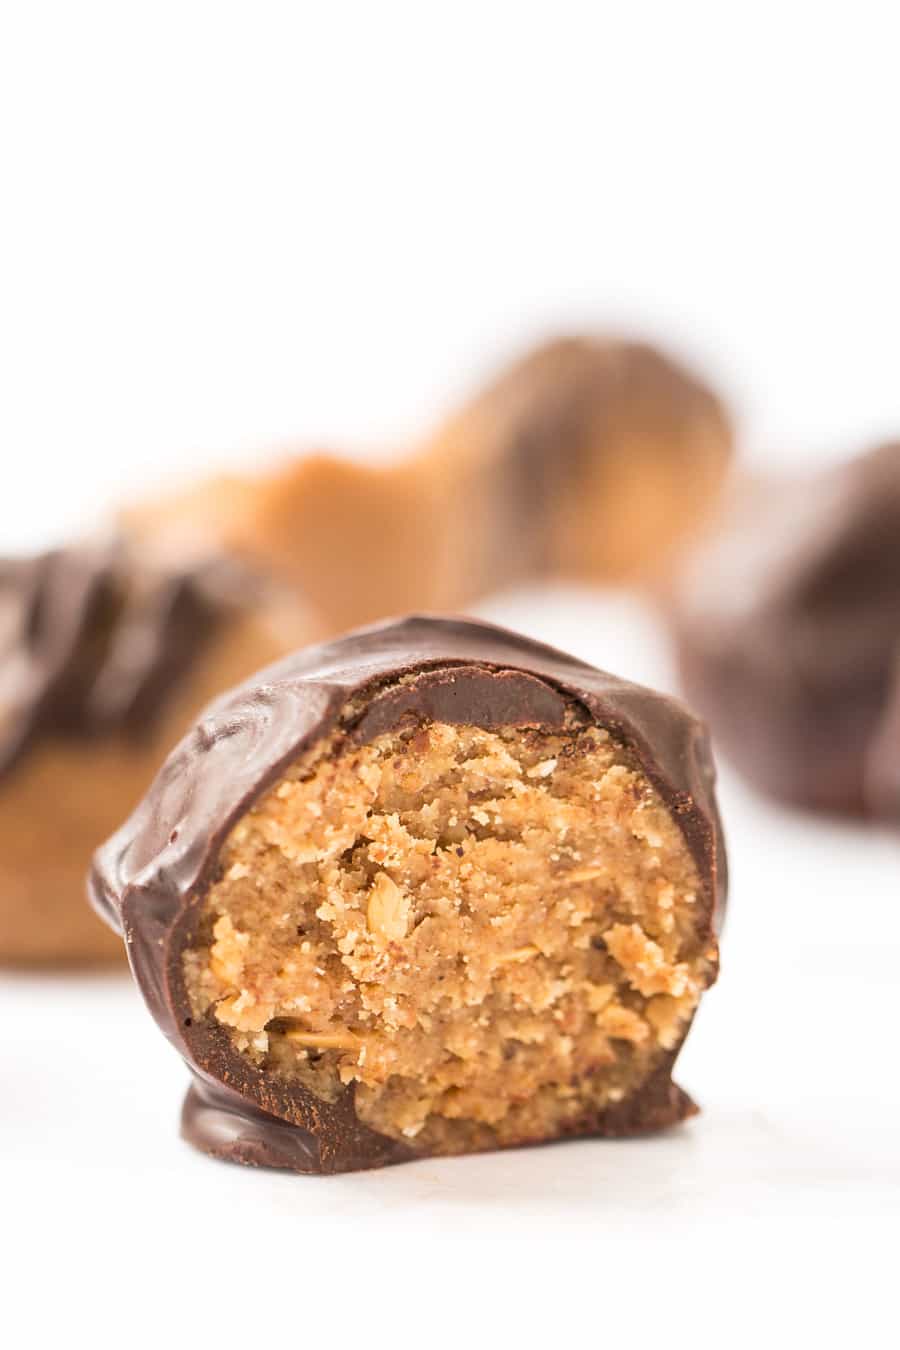 These are THE BEST Almond Butter Truffles I've ever had. Only use 4 ingredients, are super simple to make and taste awesome!